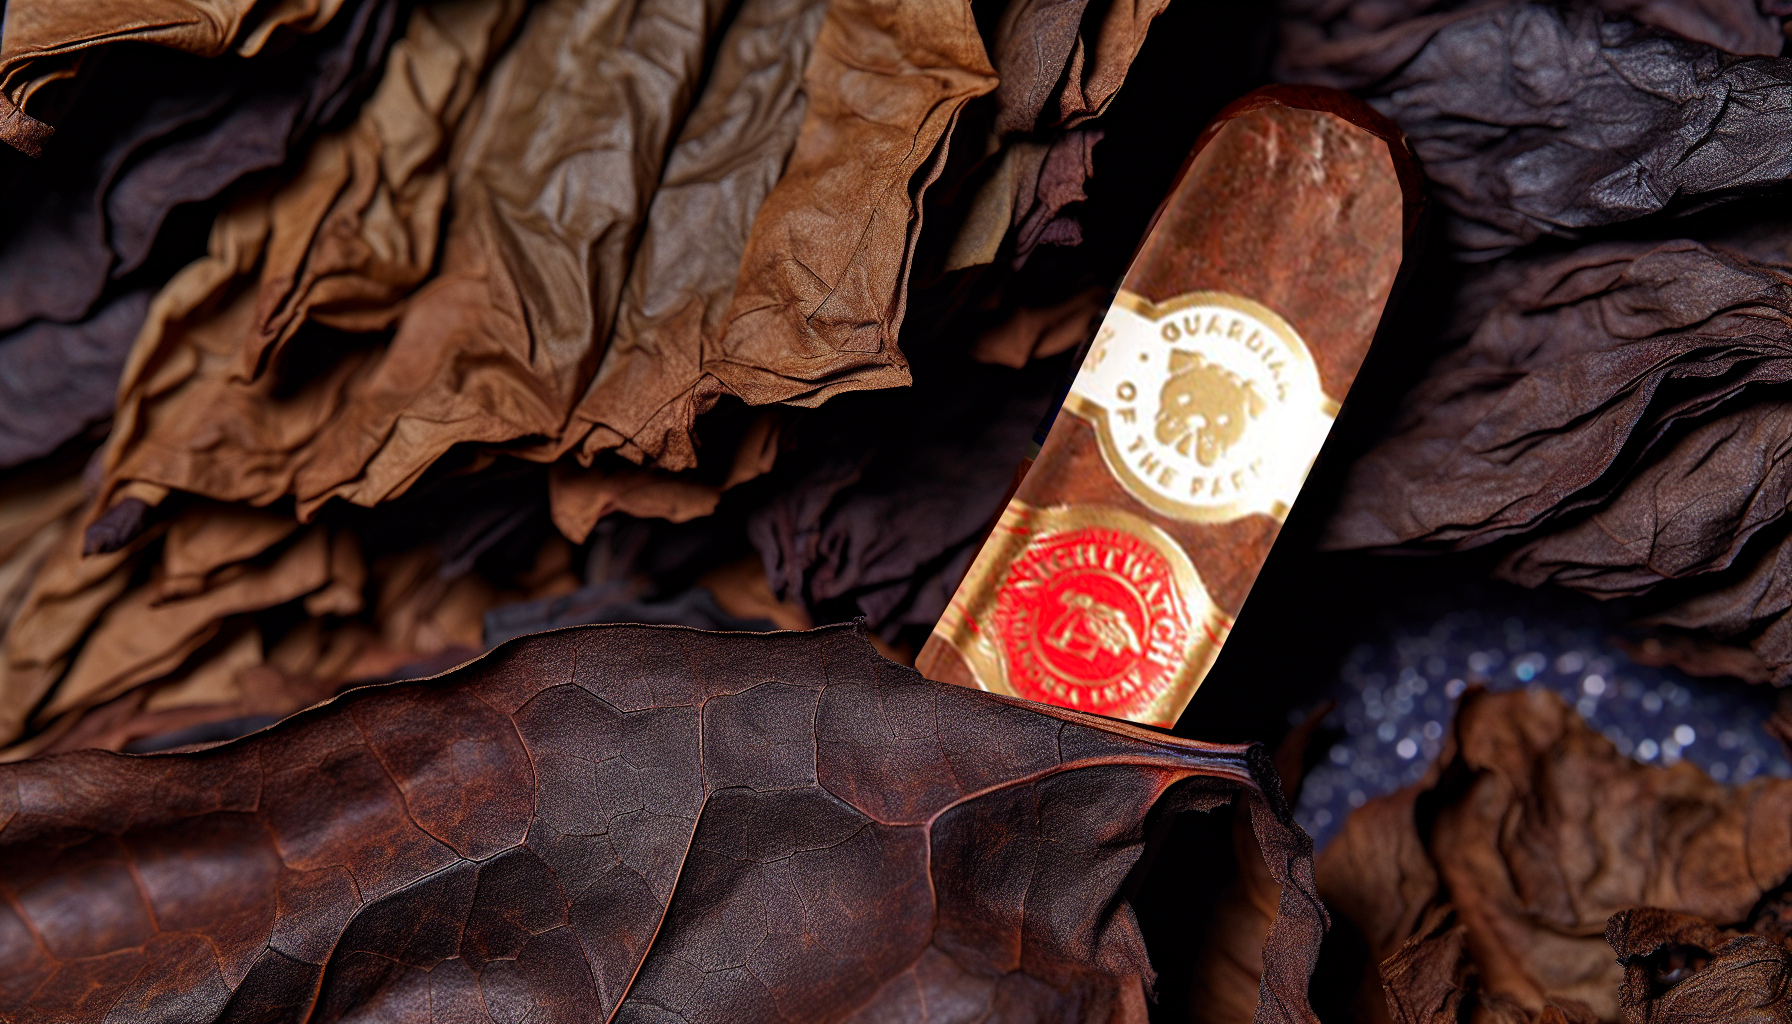 Close-up of the components used in the Guardian of the Farm Nightwatch cigar blend